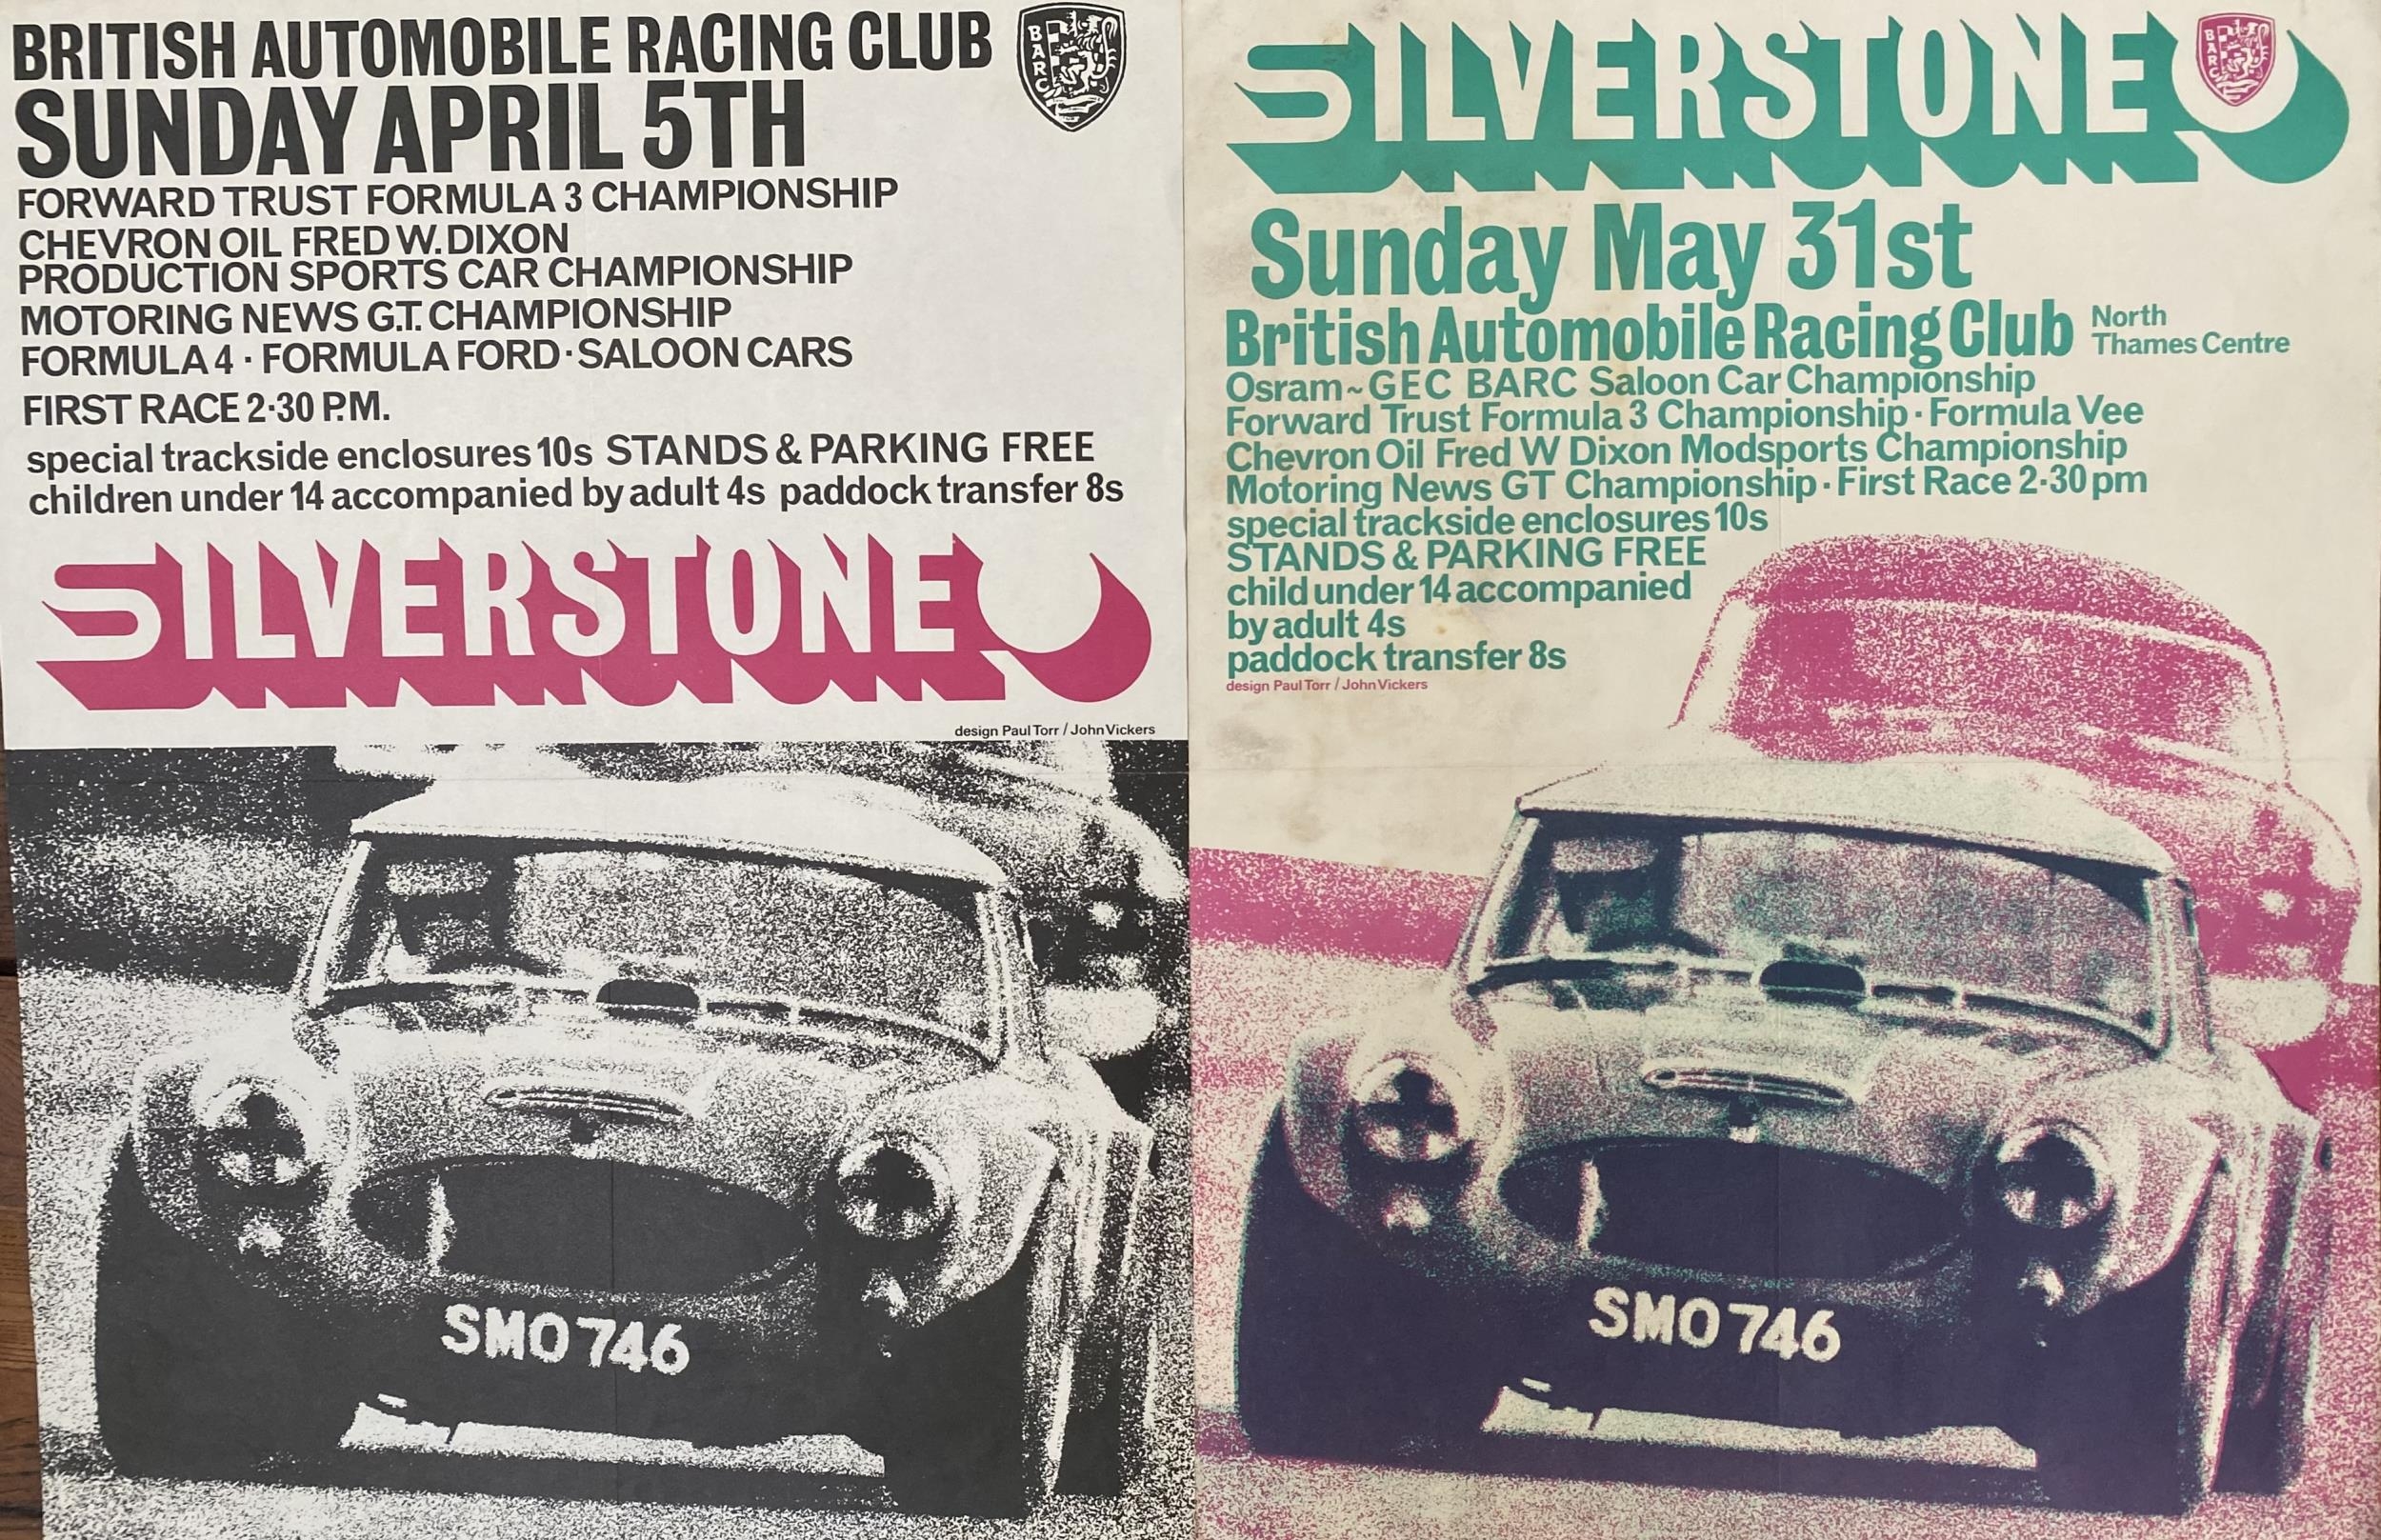 Two original BARC motor racing posters, Silverstone 5th April, 31st May, one in good order, one with